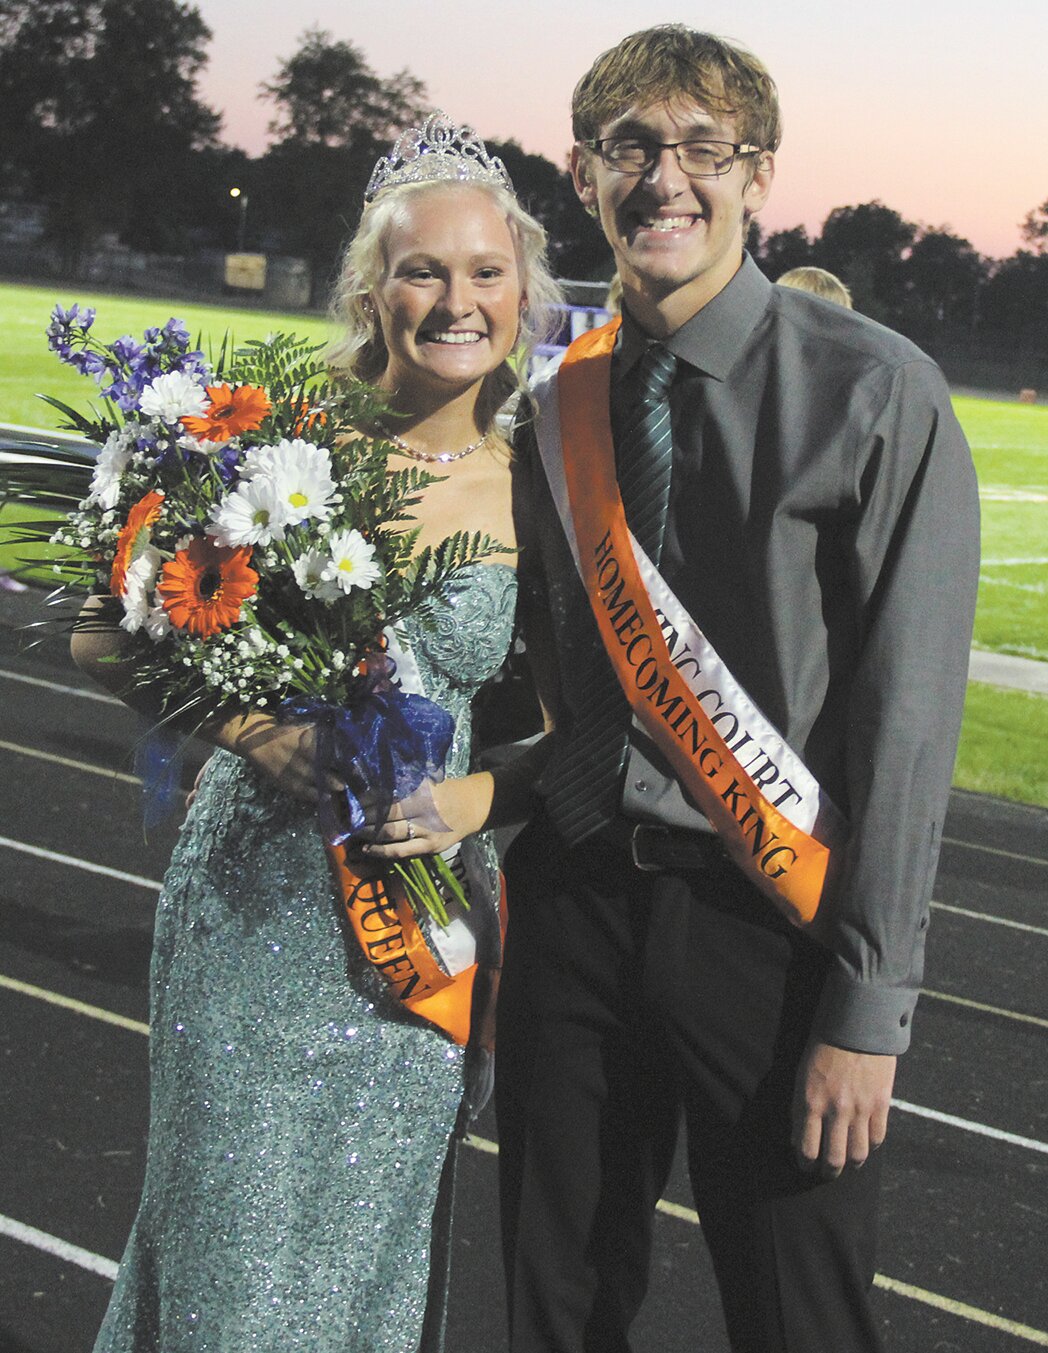 Paige Hudson and Paul Lueking were crowned the 2023 Fall Homecoming Queen and King at North Montgomery High School on Friday.